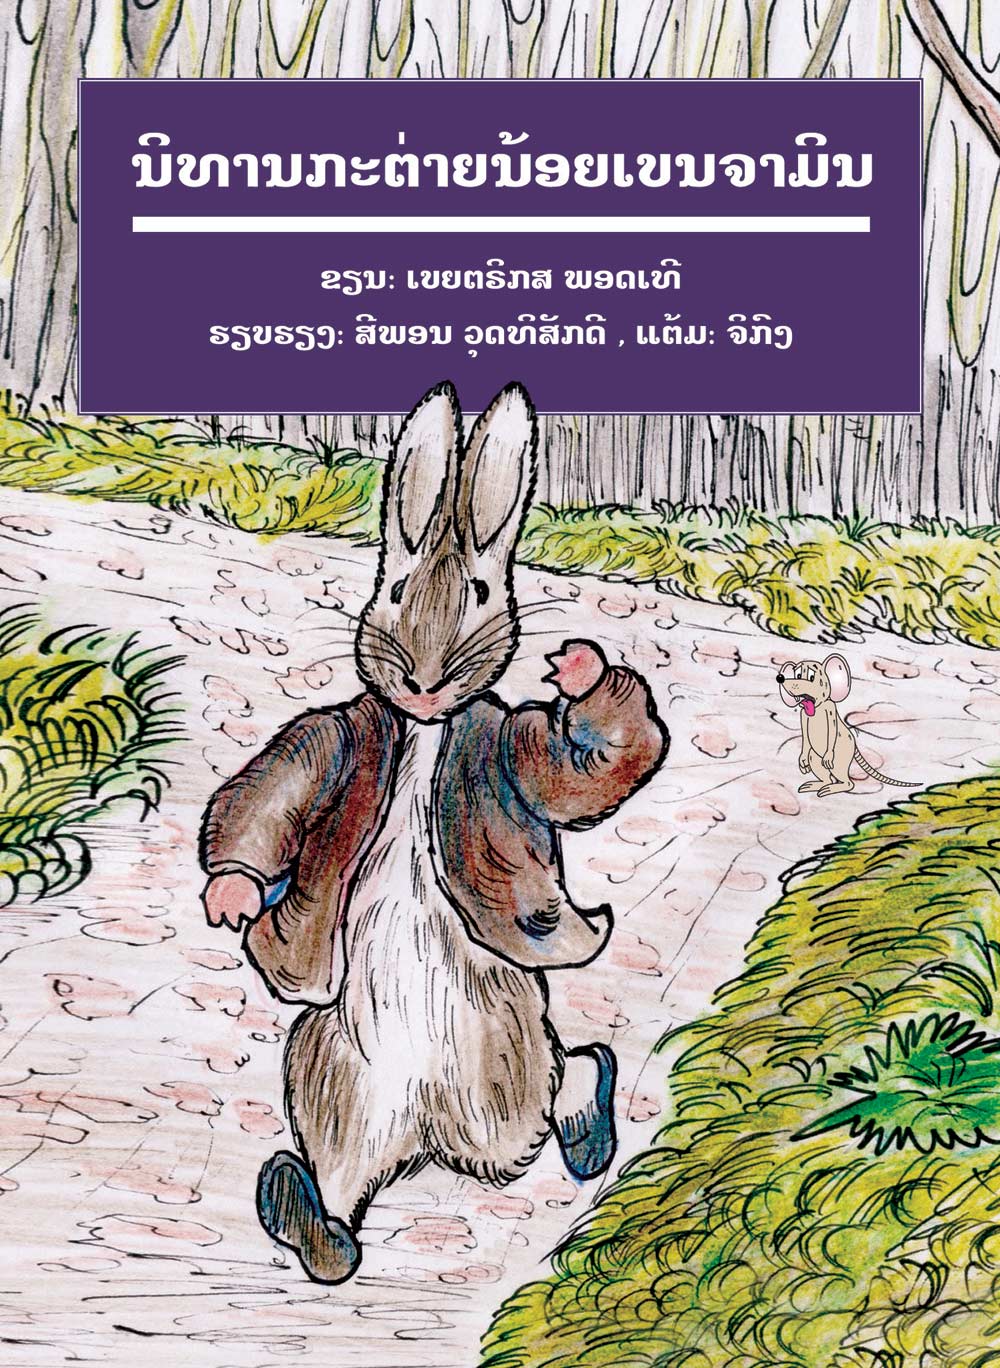 The Tale of Benjamin Bunny large book cover, published in Lao language